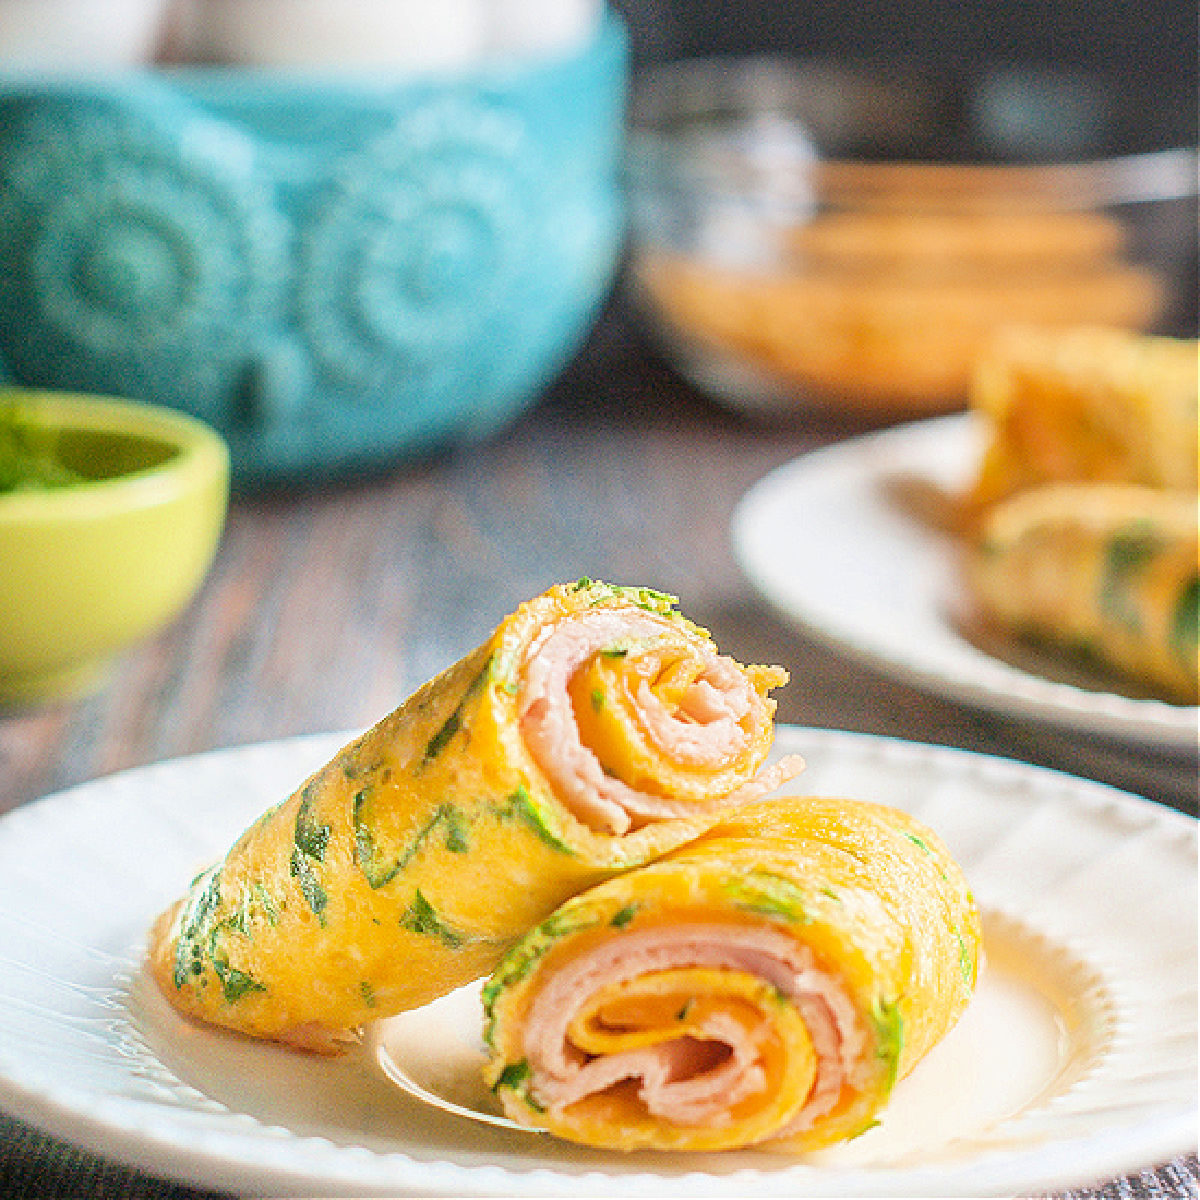 29 Sandwich Wraps You'll Want to Roll-Up for Lunch